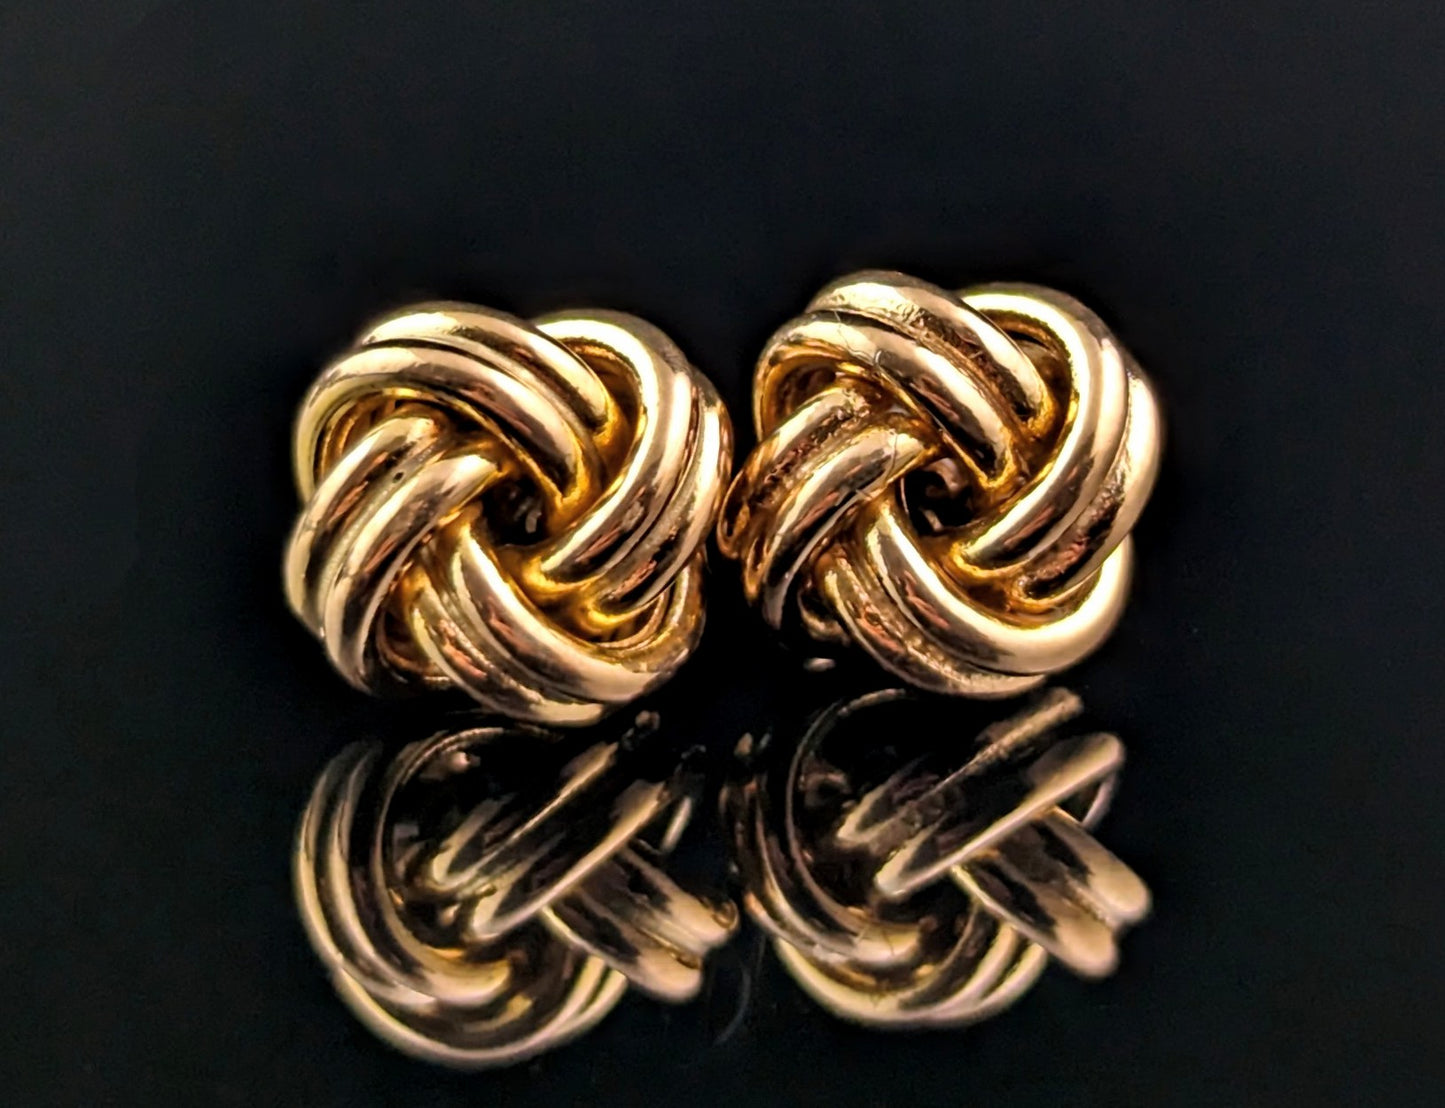 Vintage 9ct yellow gold lovers knot earrings, studs